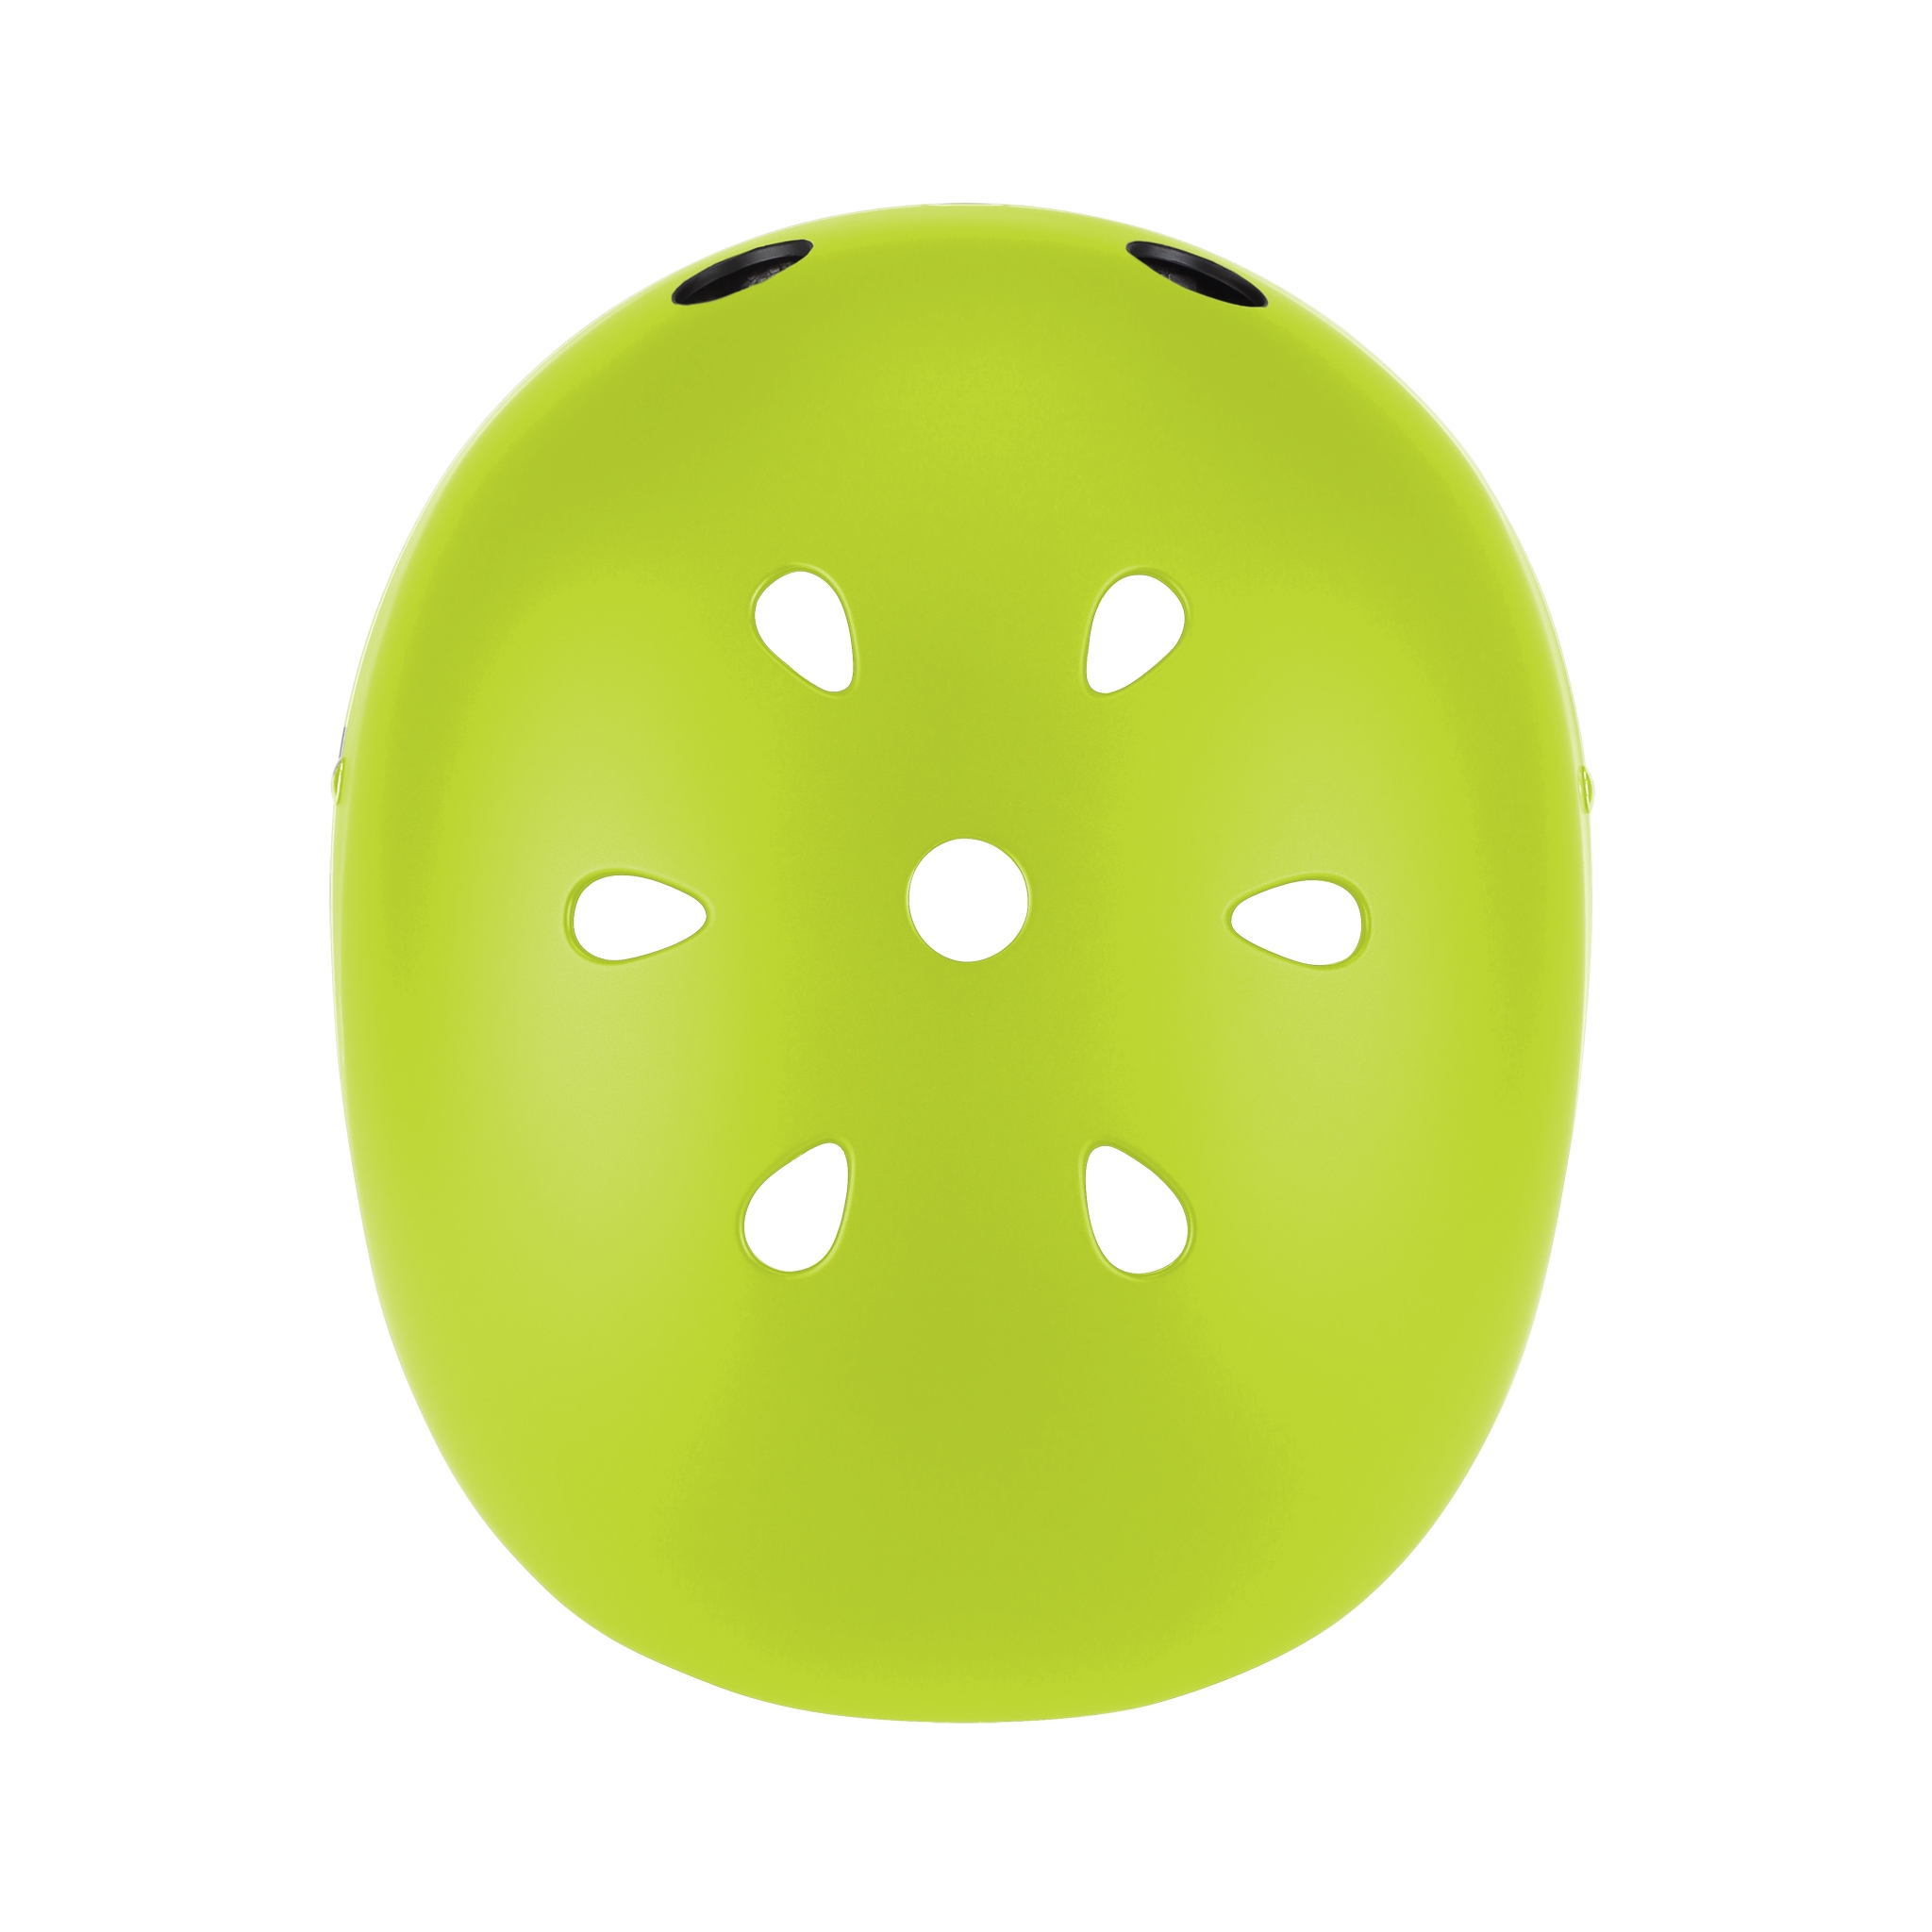 PRIMO-helmets-best-scooter-helmets-for-kids-with-air-vents-cooling-system-lime-green 3